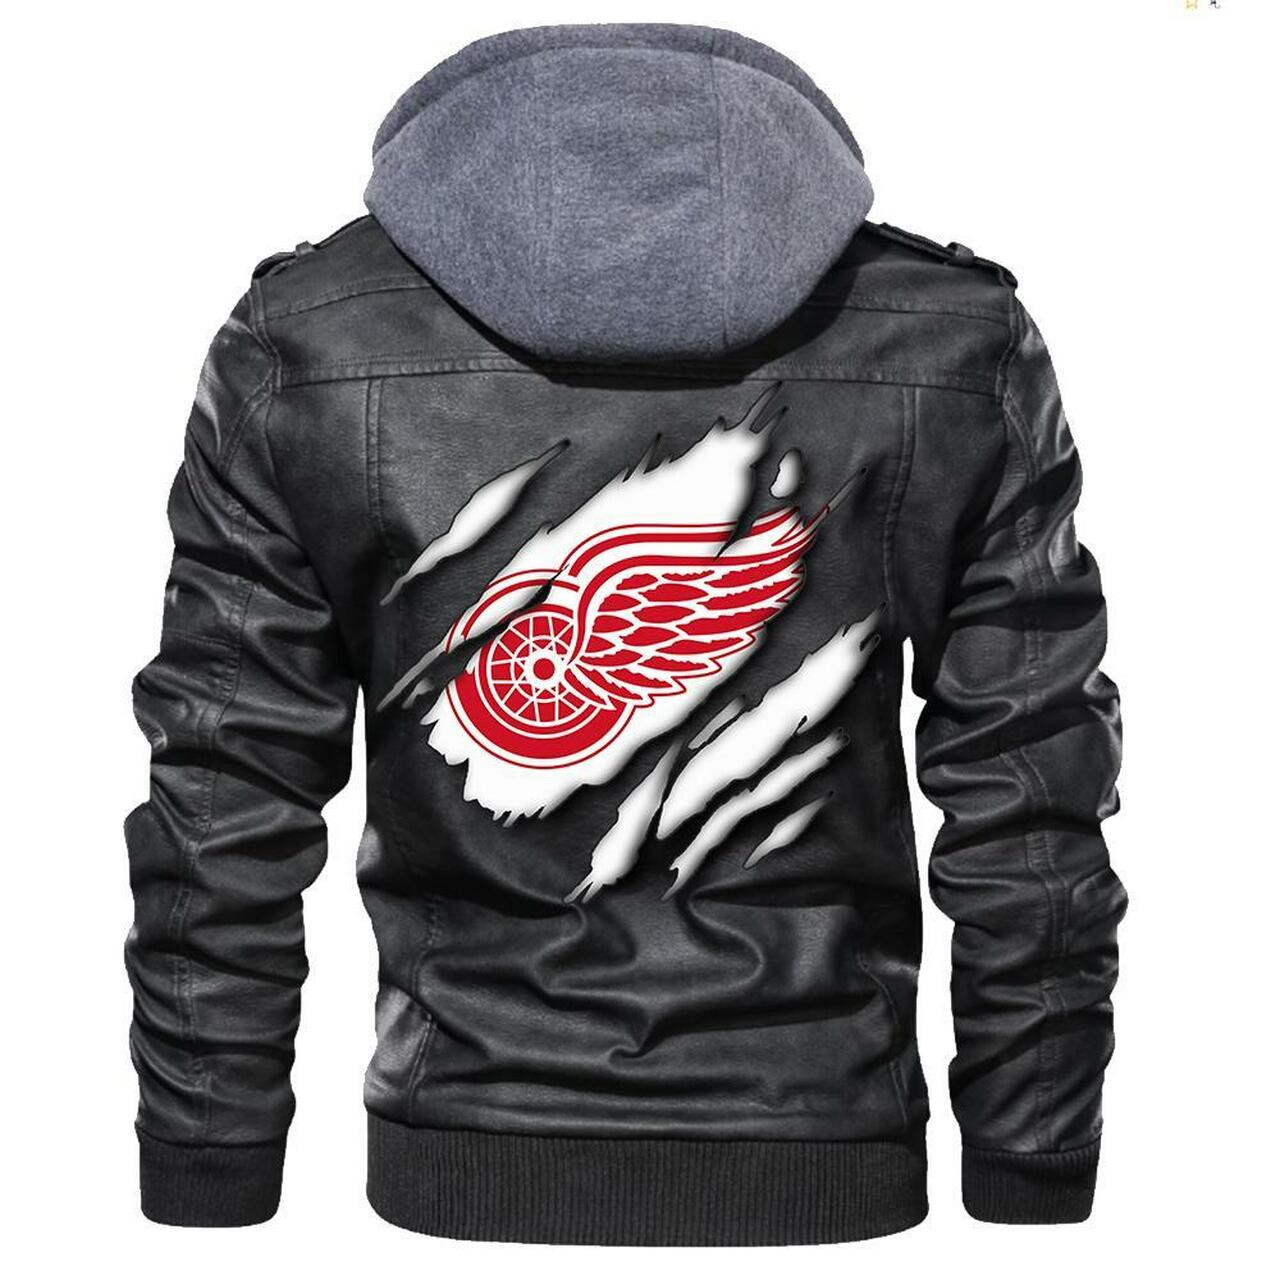 You can find Leather Jacket online at a great price 58